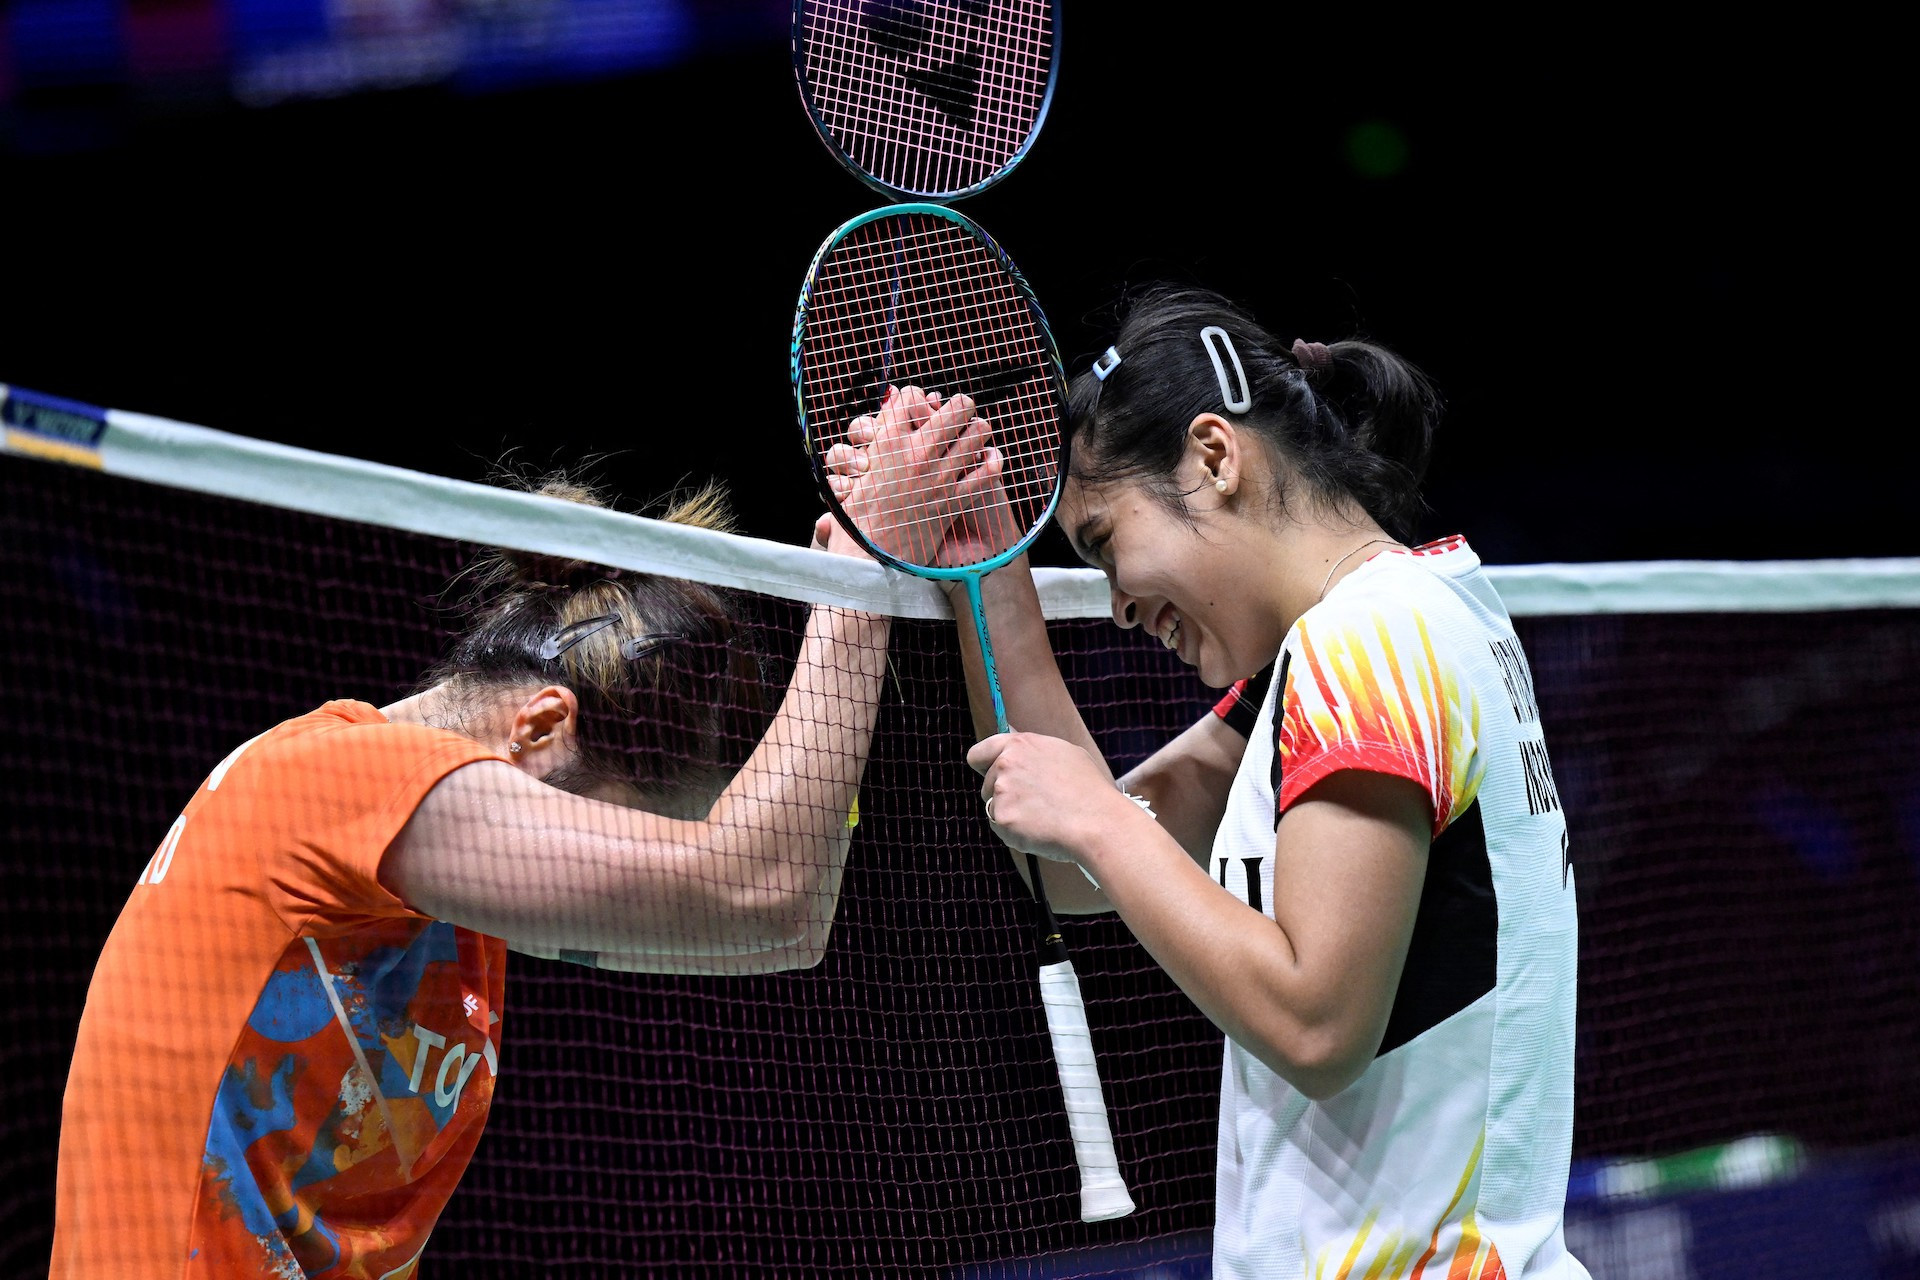 172 athletes will compete in the badminton event in Paris 2024. GETTY IMAGES